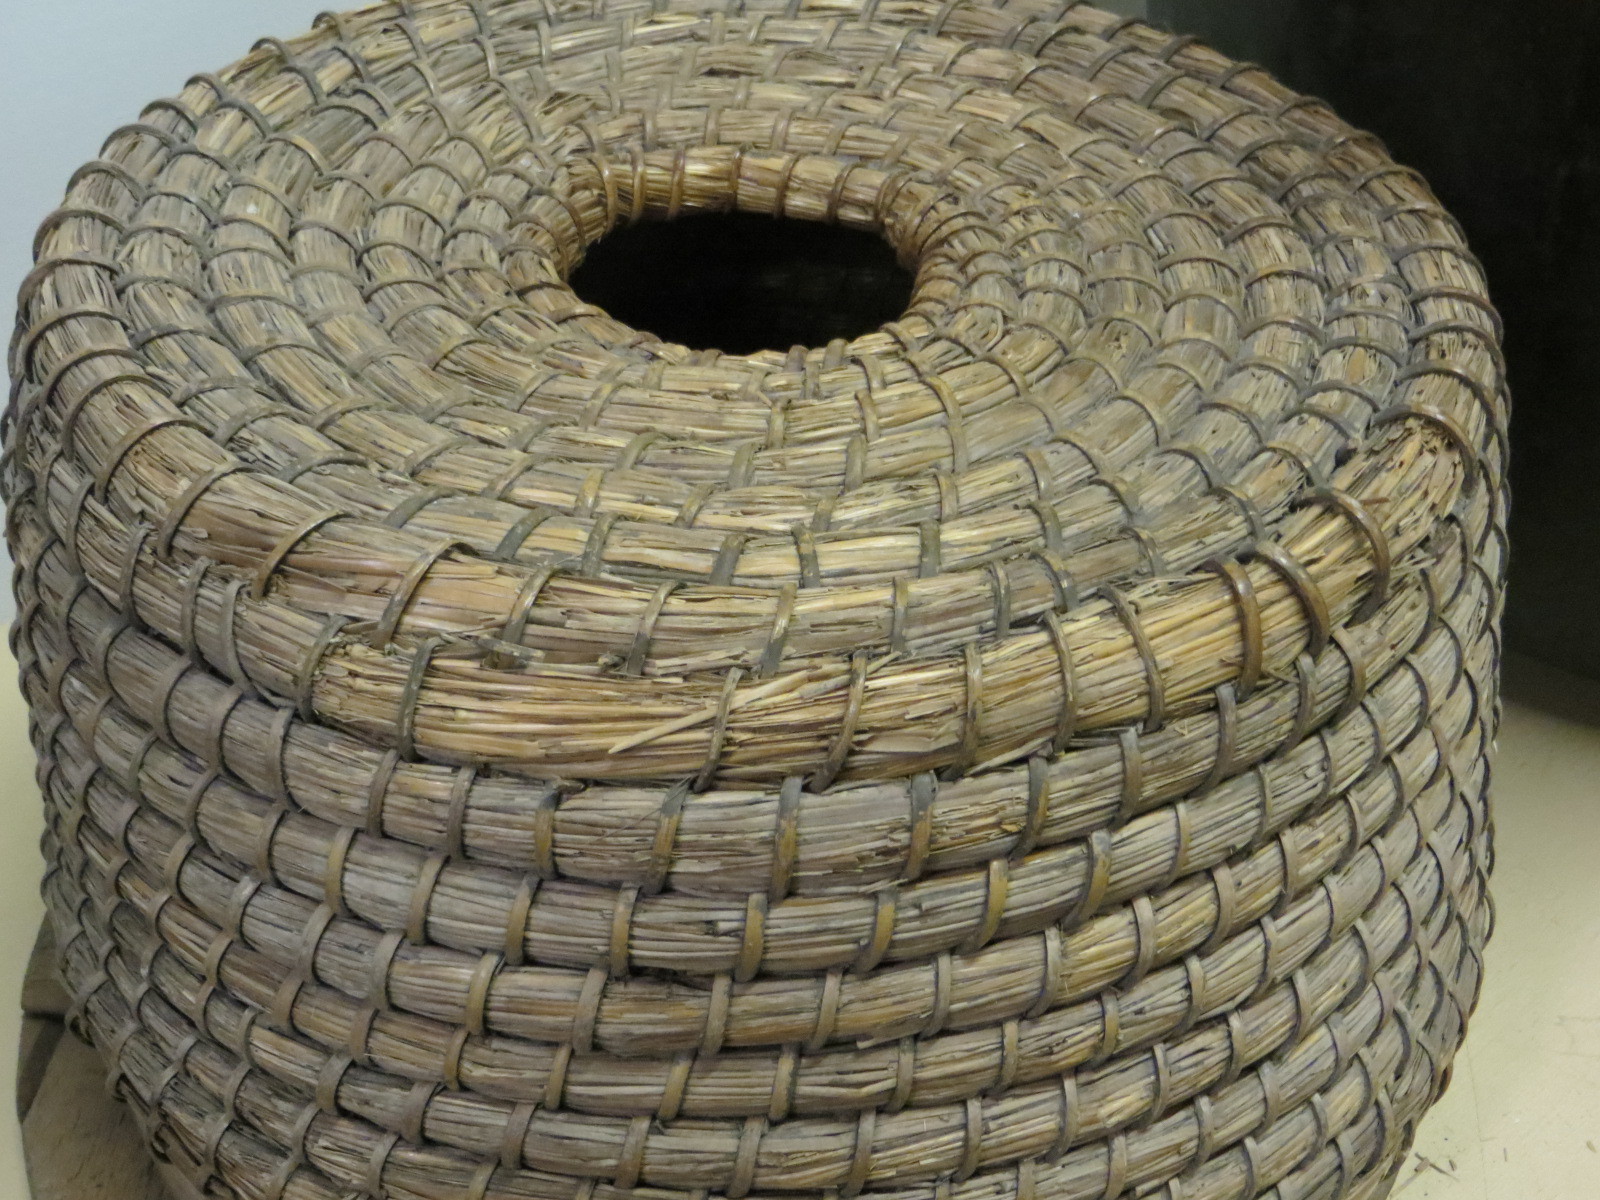 A skep which was placed in a bee bole